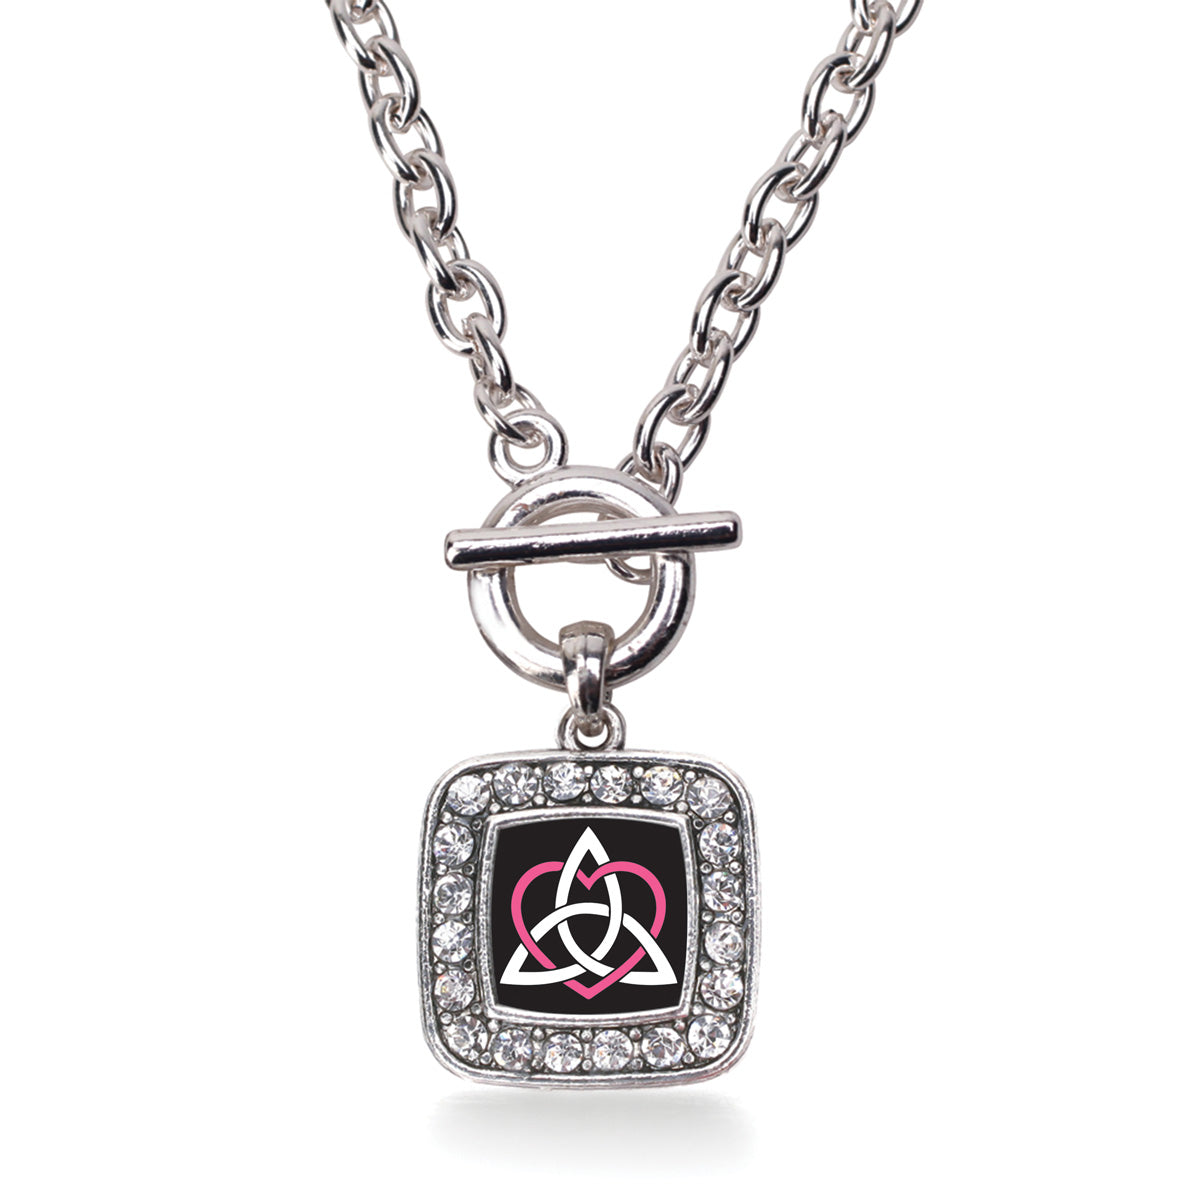 Silver Celtic Sisters Knot Square Charm Toggle Necklace